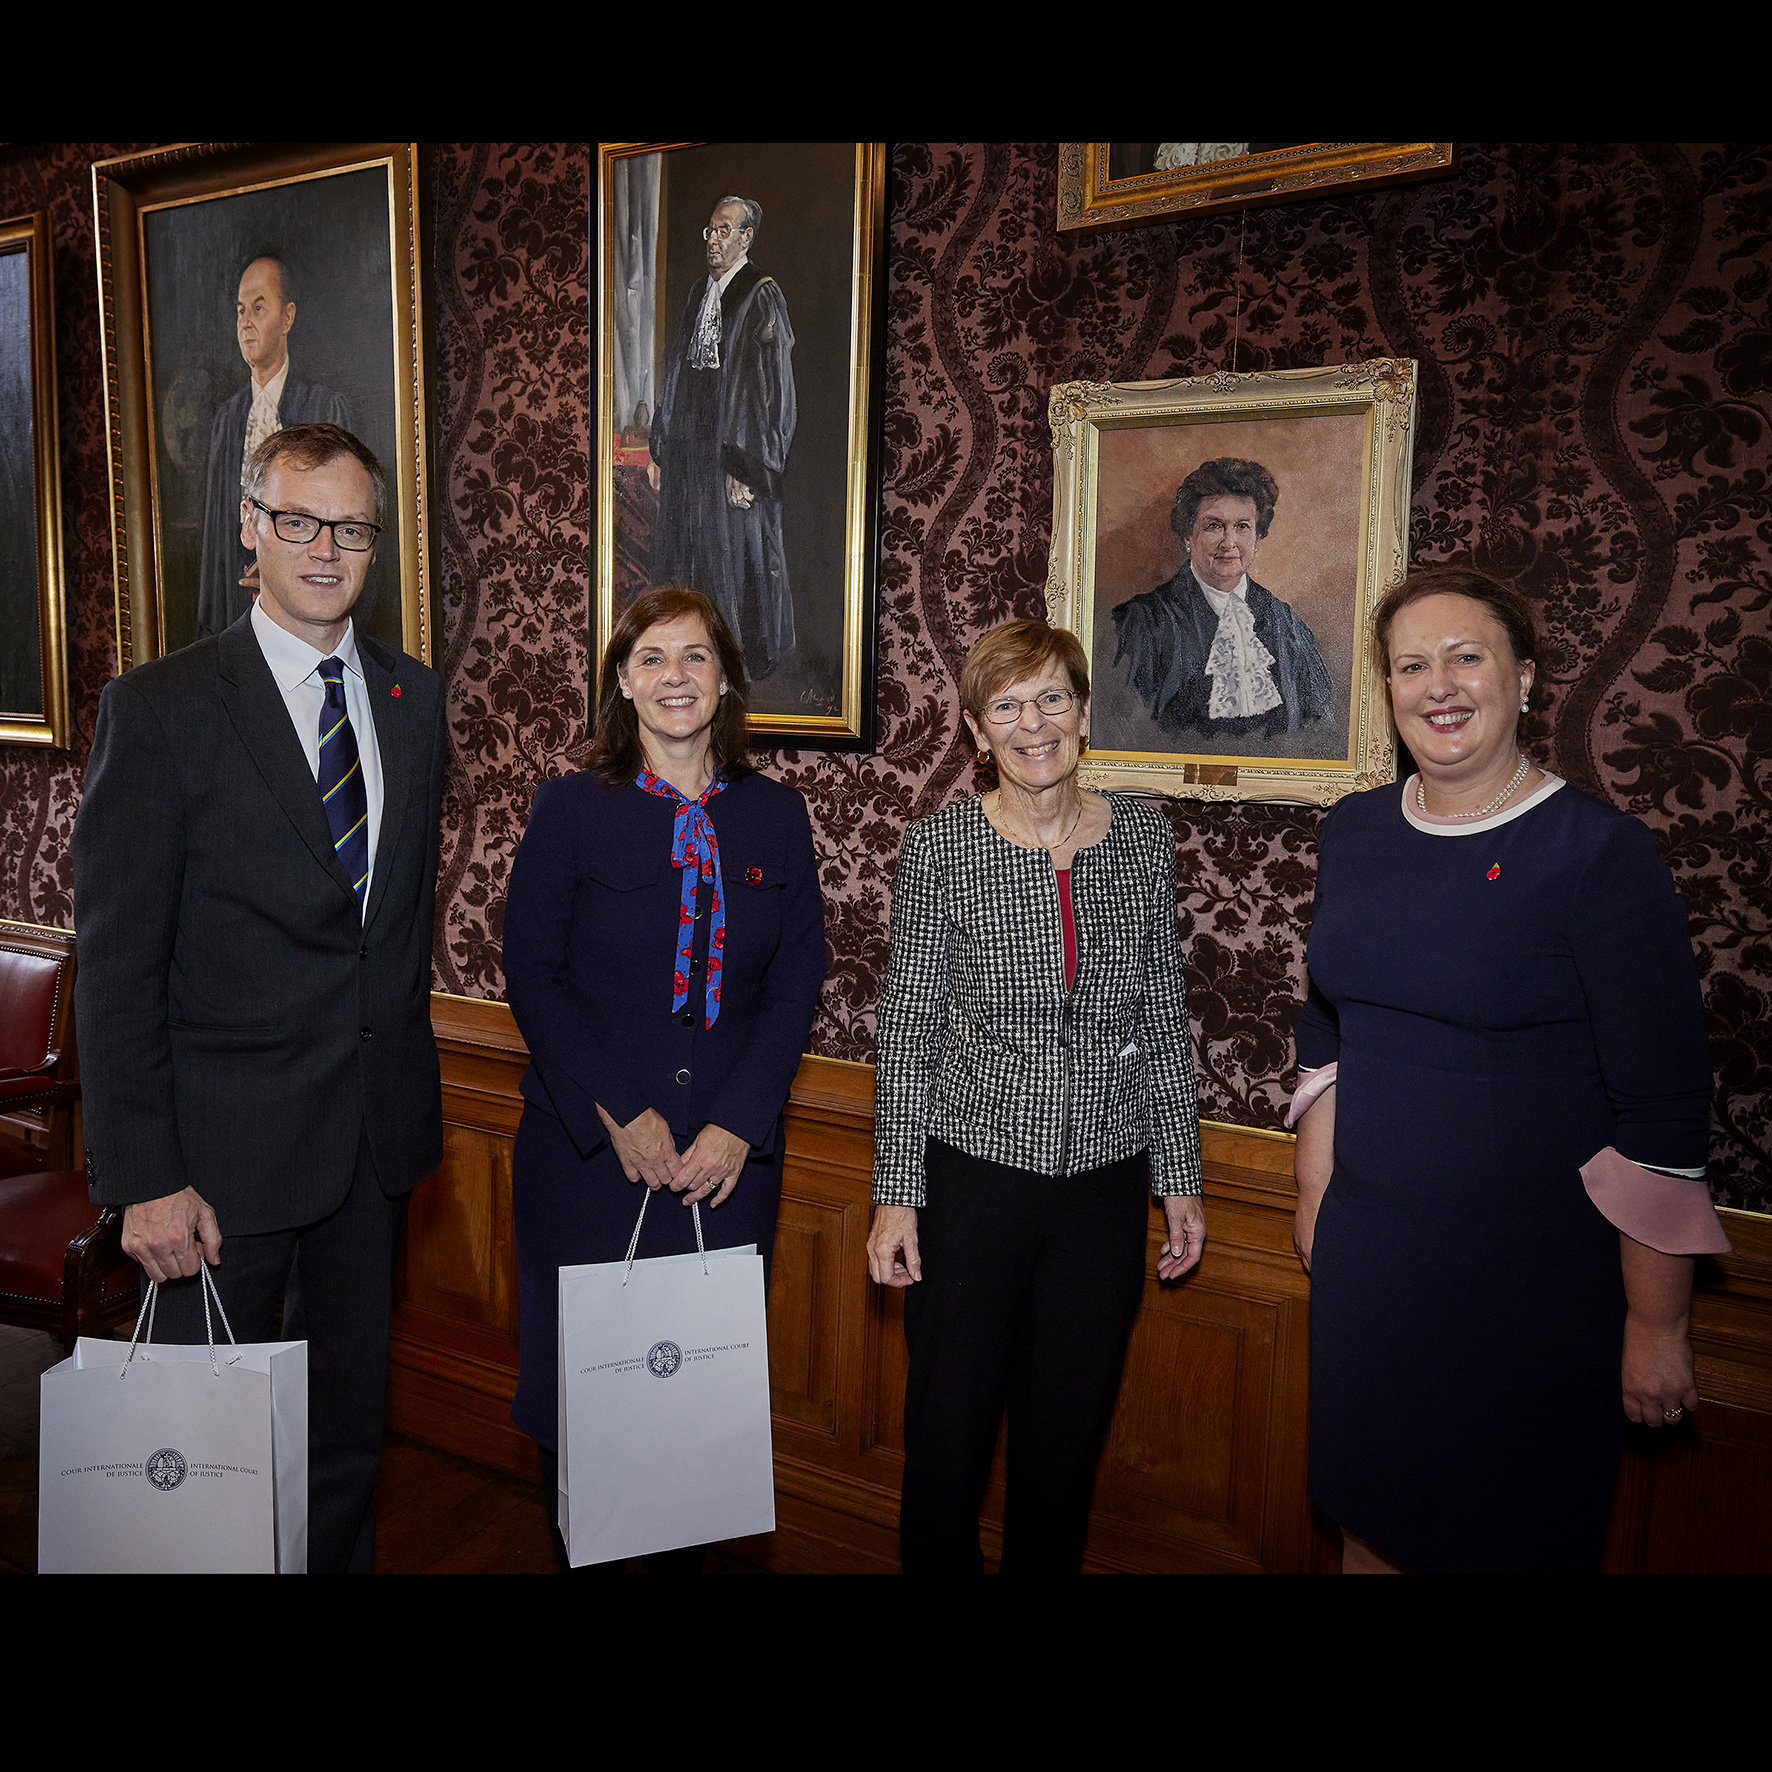 Exchange of gifts between H.E. Ms Victoria Prentis, Attorney General for England and Wales and Advocate General for Northern Ireland, and H.E. Judge Joan E. Donoghue, President of the Court  